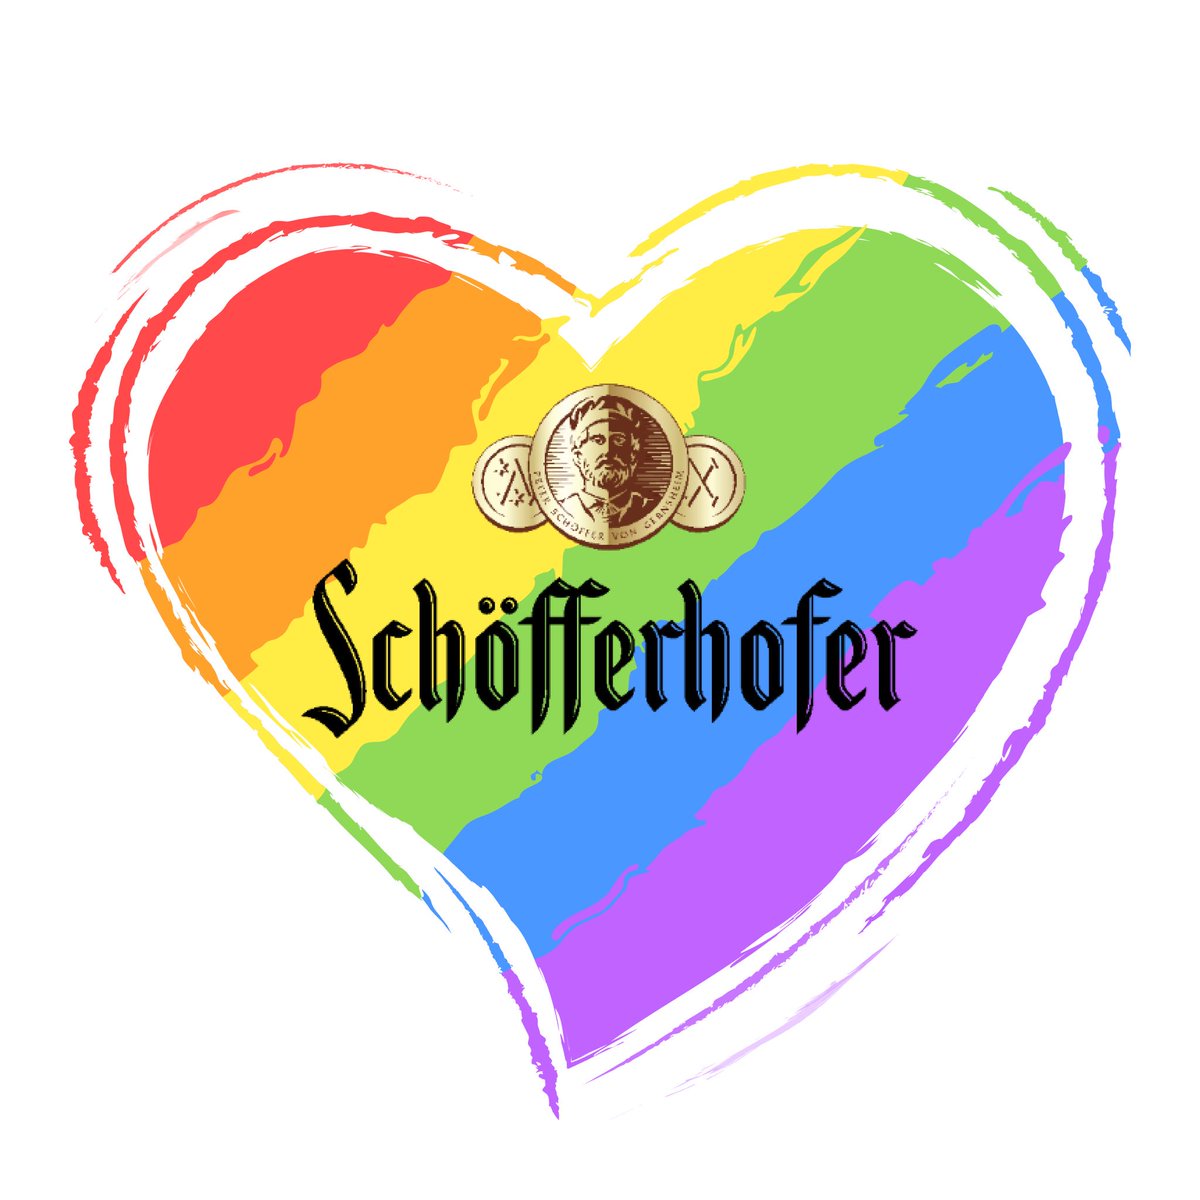 Who’s celebrating #PrideMonth with us?!! Head over to facebook.com/SchofferhoferU… for great #beer specials and parties!